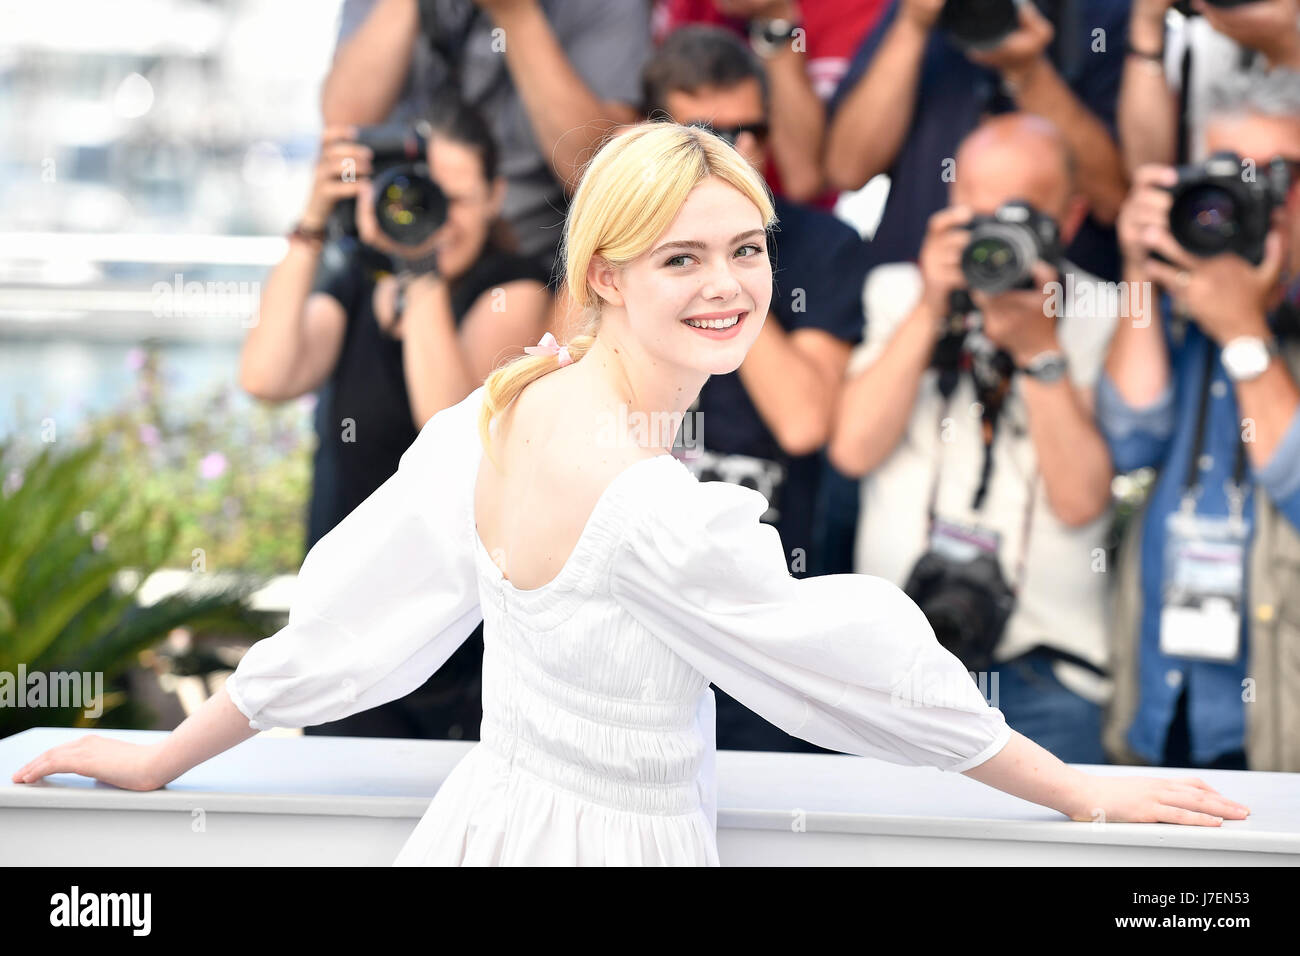 Cannes, France. 24th May, 2017. Actress Elle Fanning of the film 'The Beguiled' poses for a photocall in Cannes, France on May 24, 2017. The film 'The Beguiled' directed by American director Sofia Coppola will compete for the Palme d'Or on the 70th Cannes Film Festival. Credit: Xinhua/Alamy Live News Stock Photo